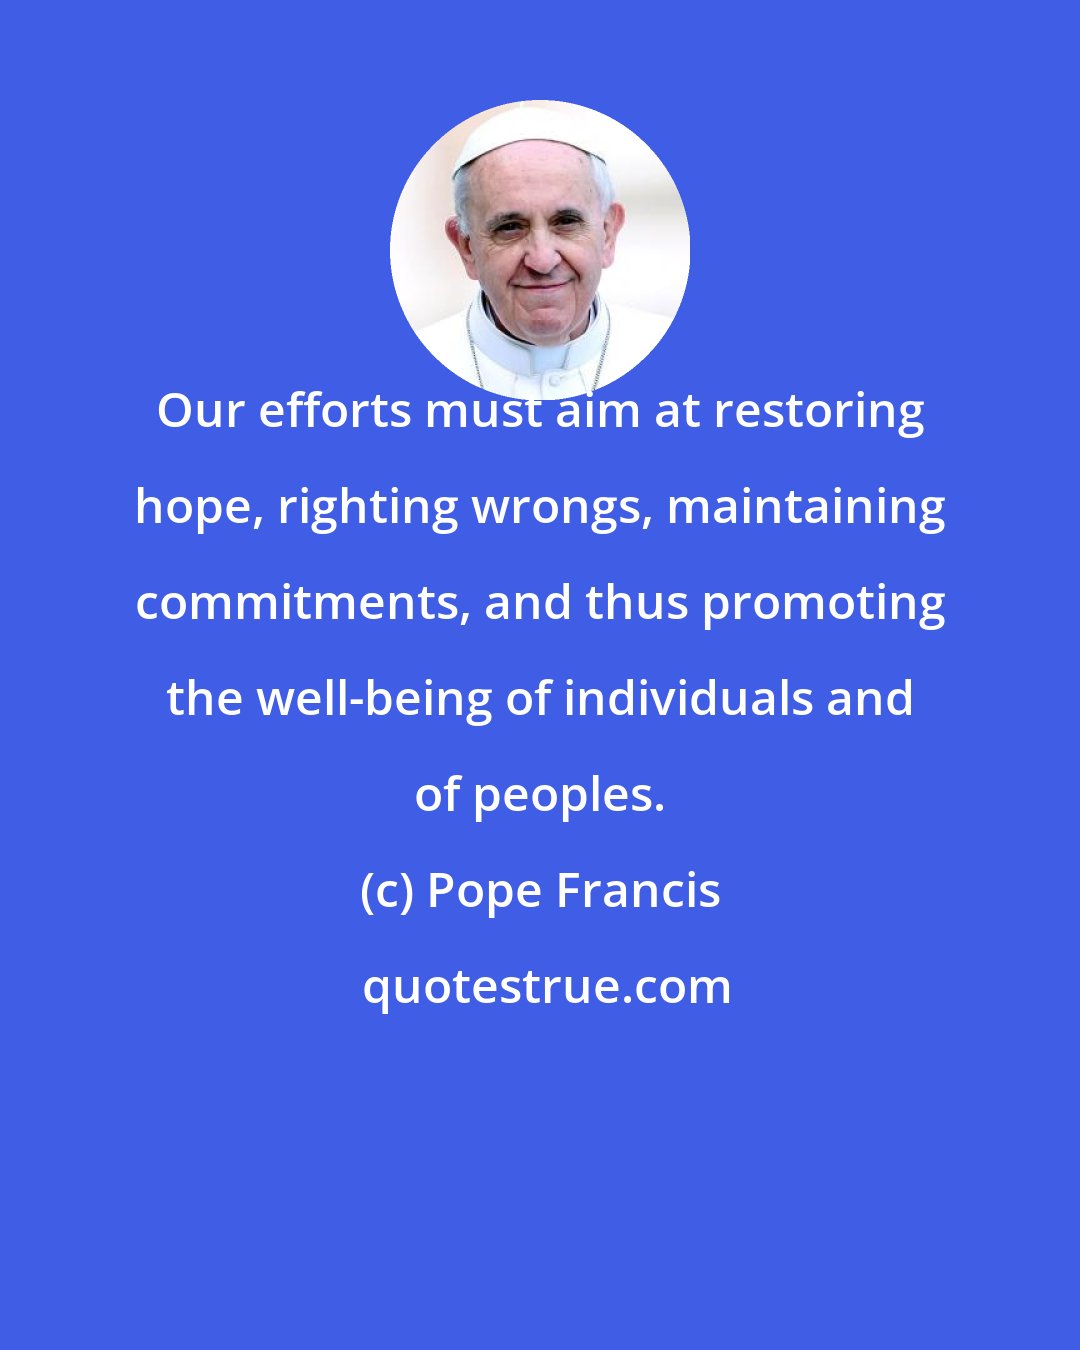 Pope Francis: Our efforts must aim at restoring hope, righting wrongs, maintaining commitments, and thus promoting the well-being of individuals and of peoples.